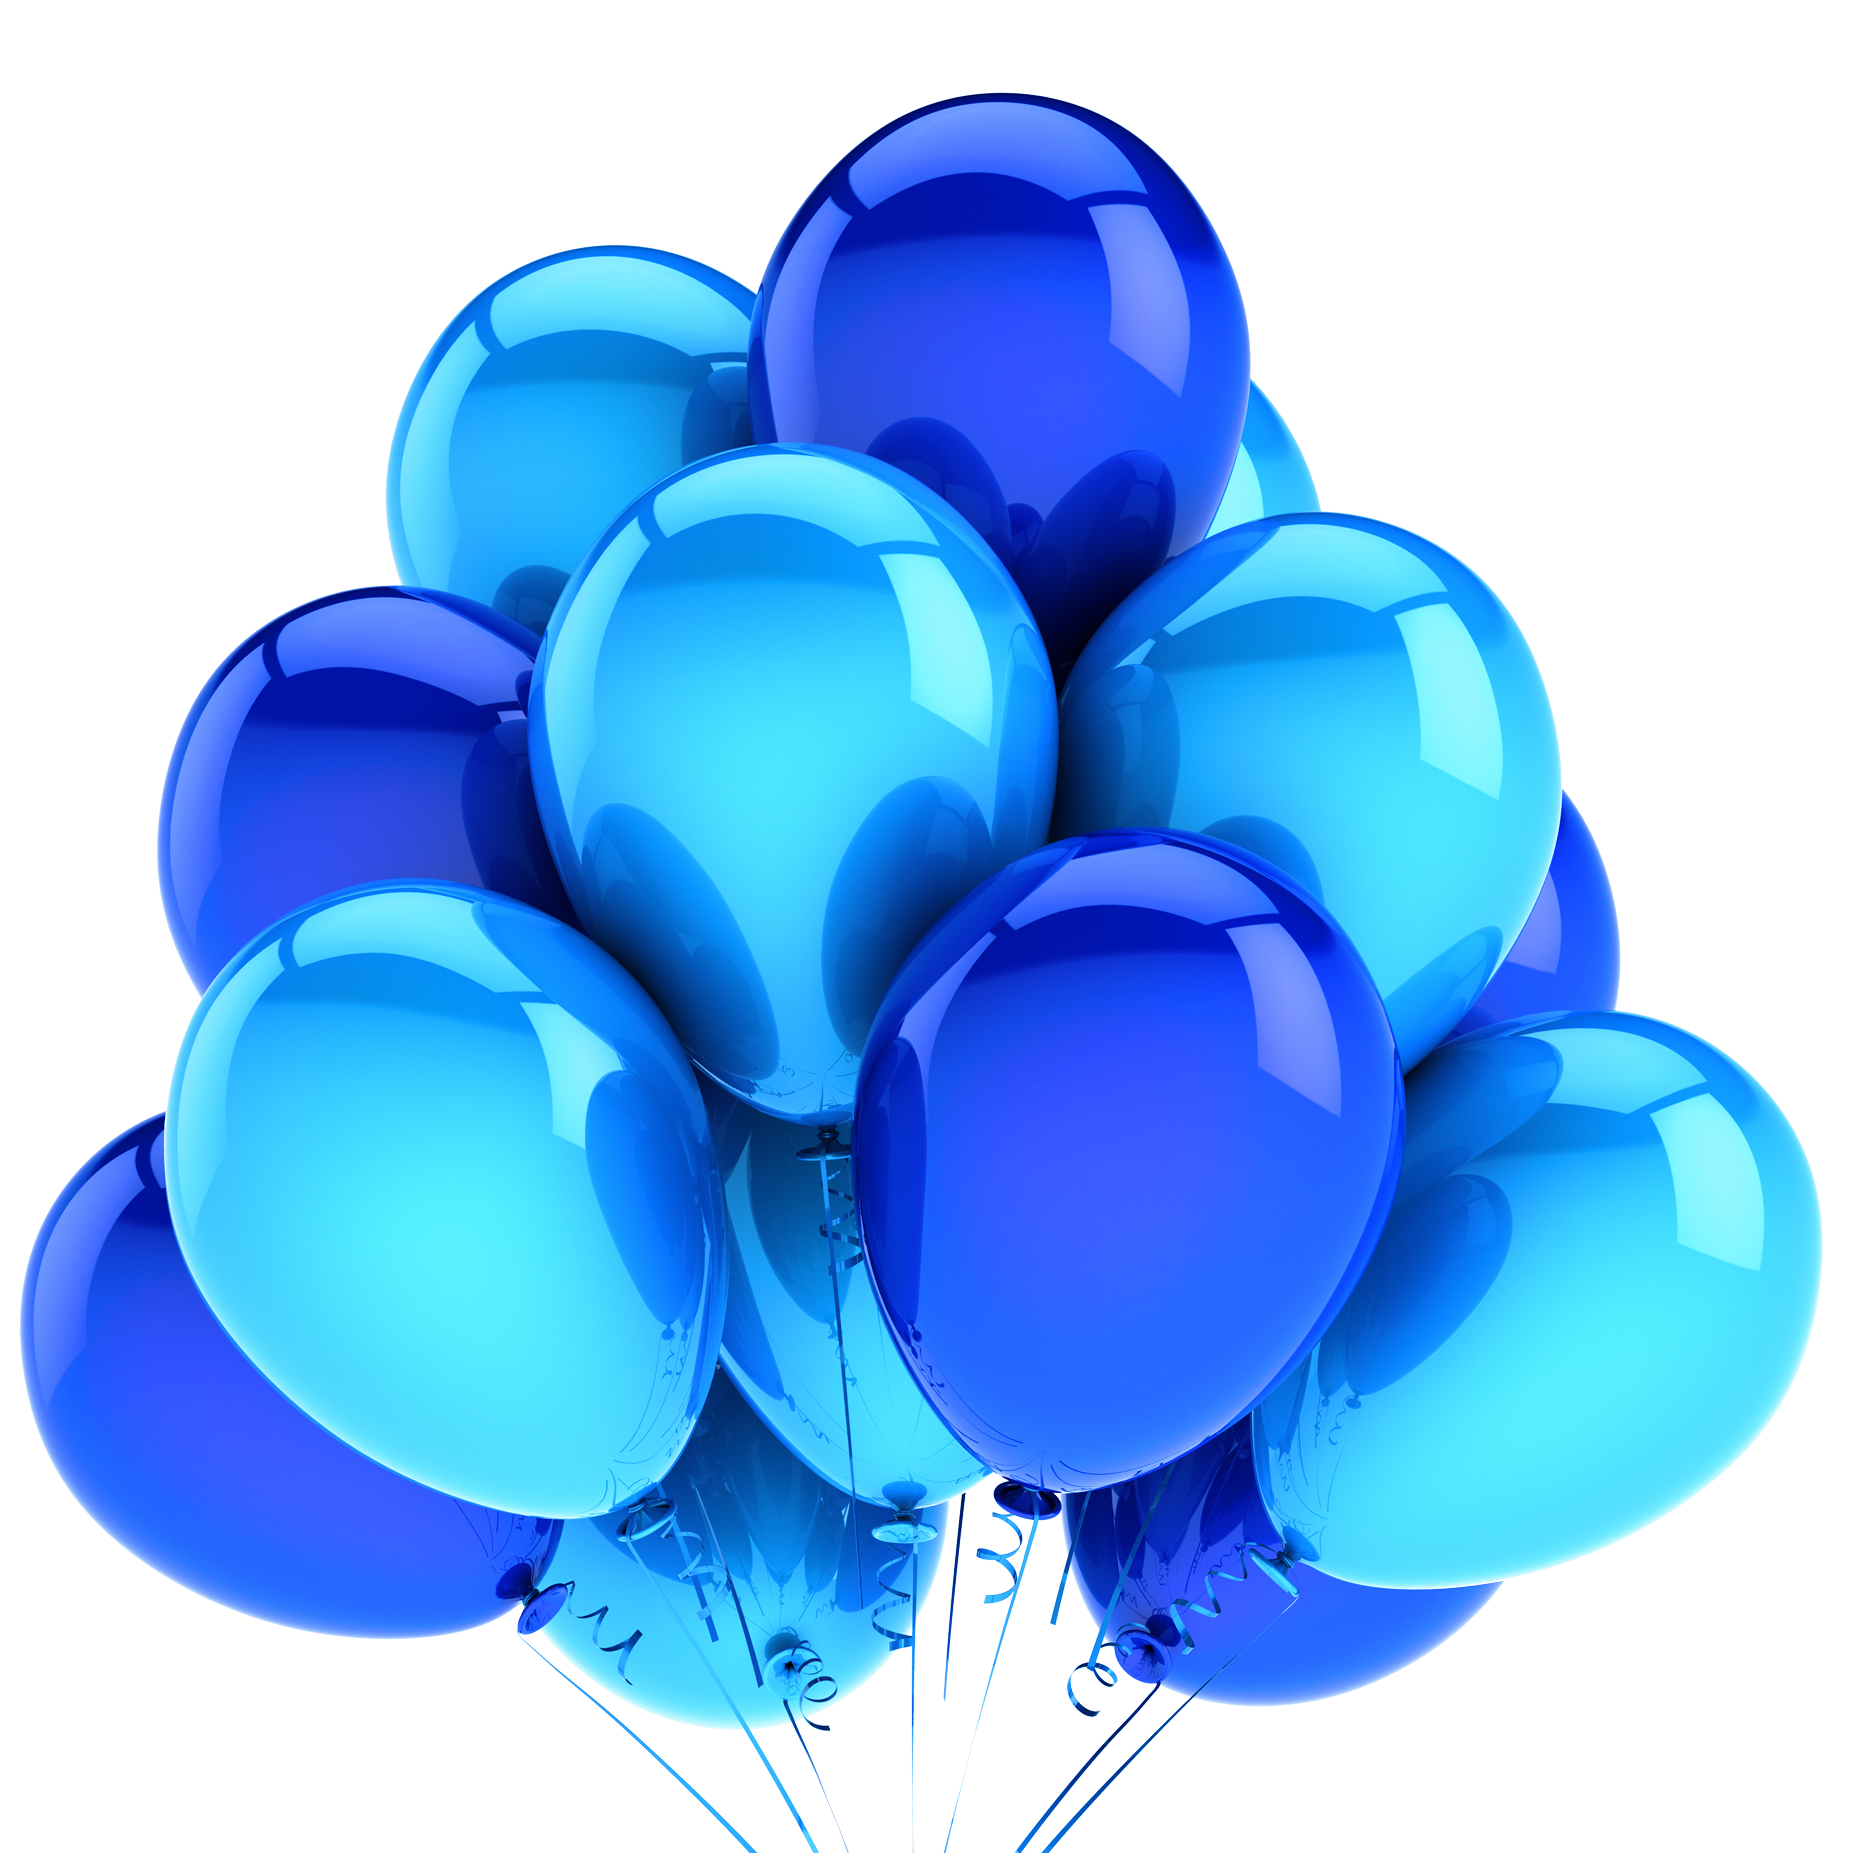 Blue party balloons.